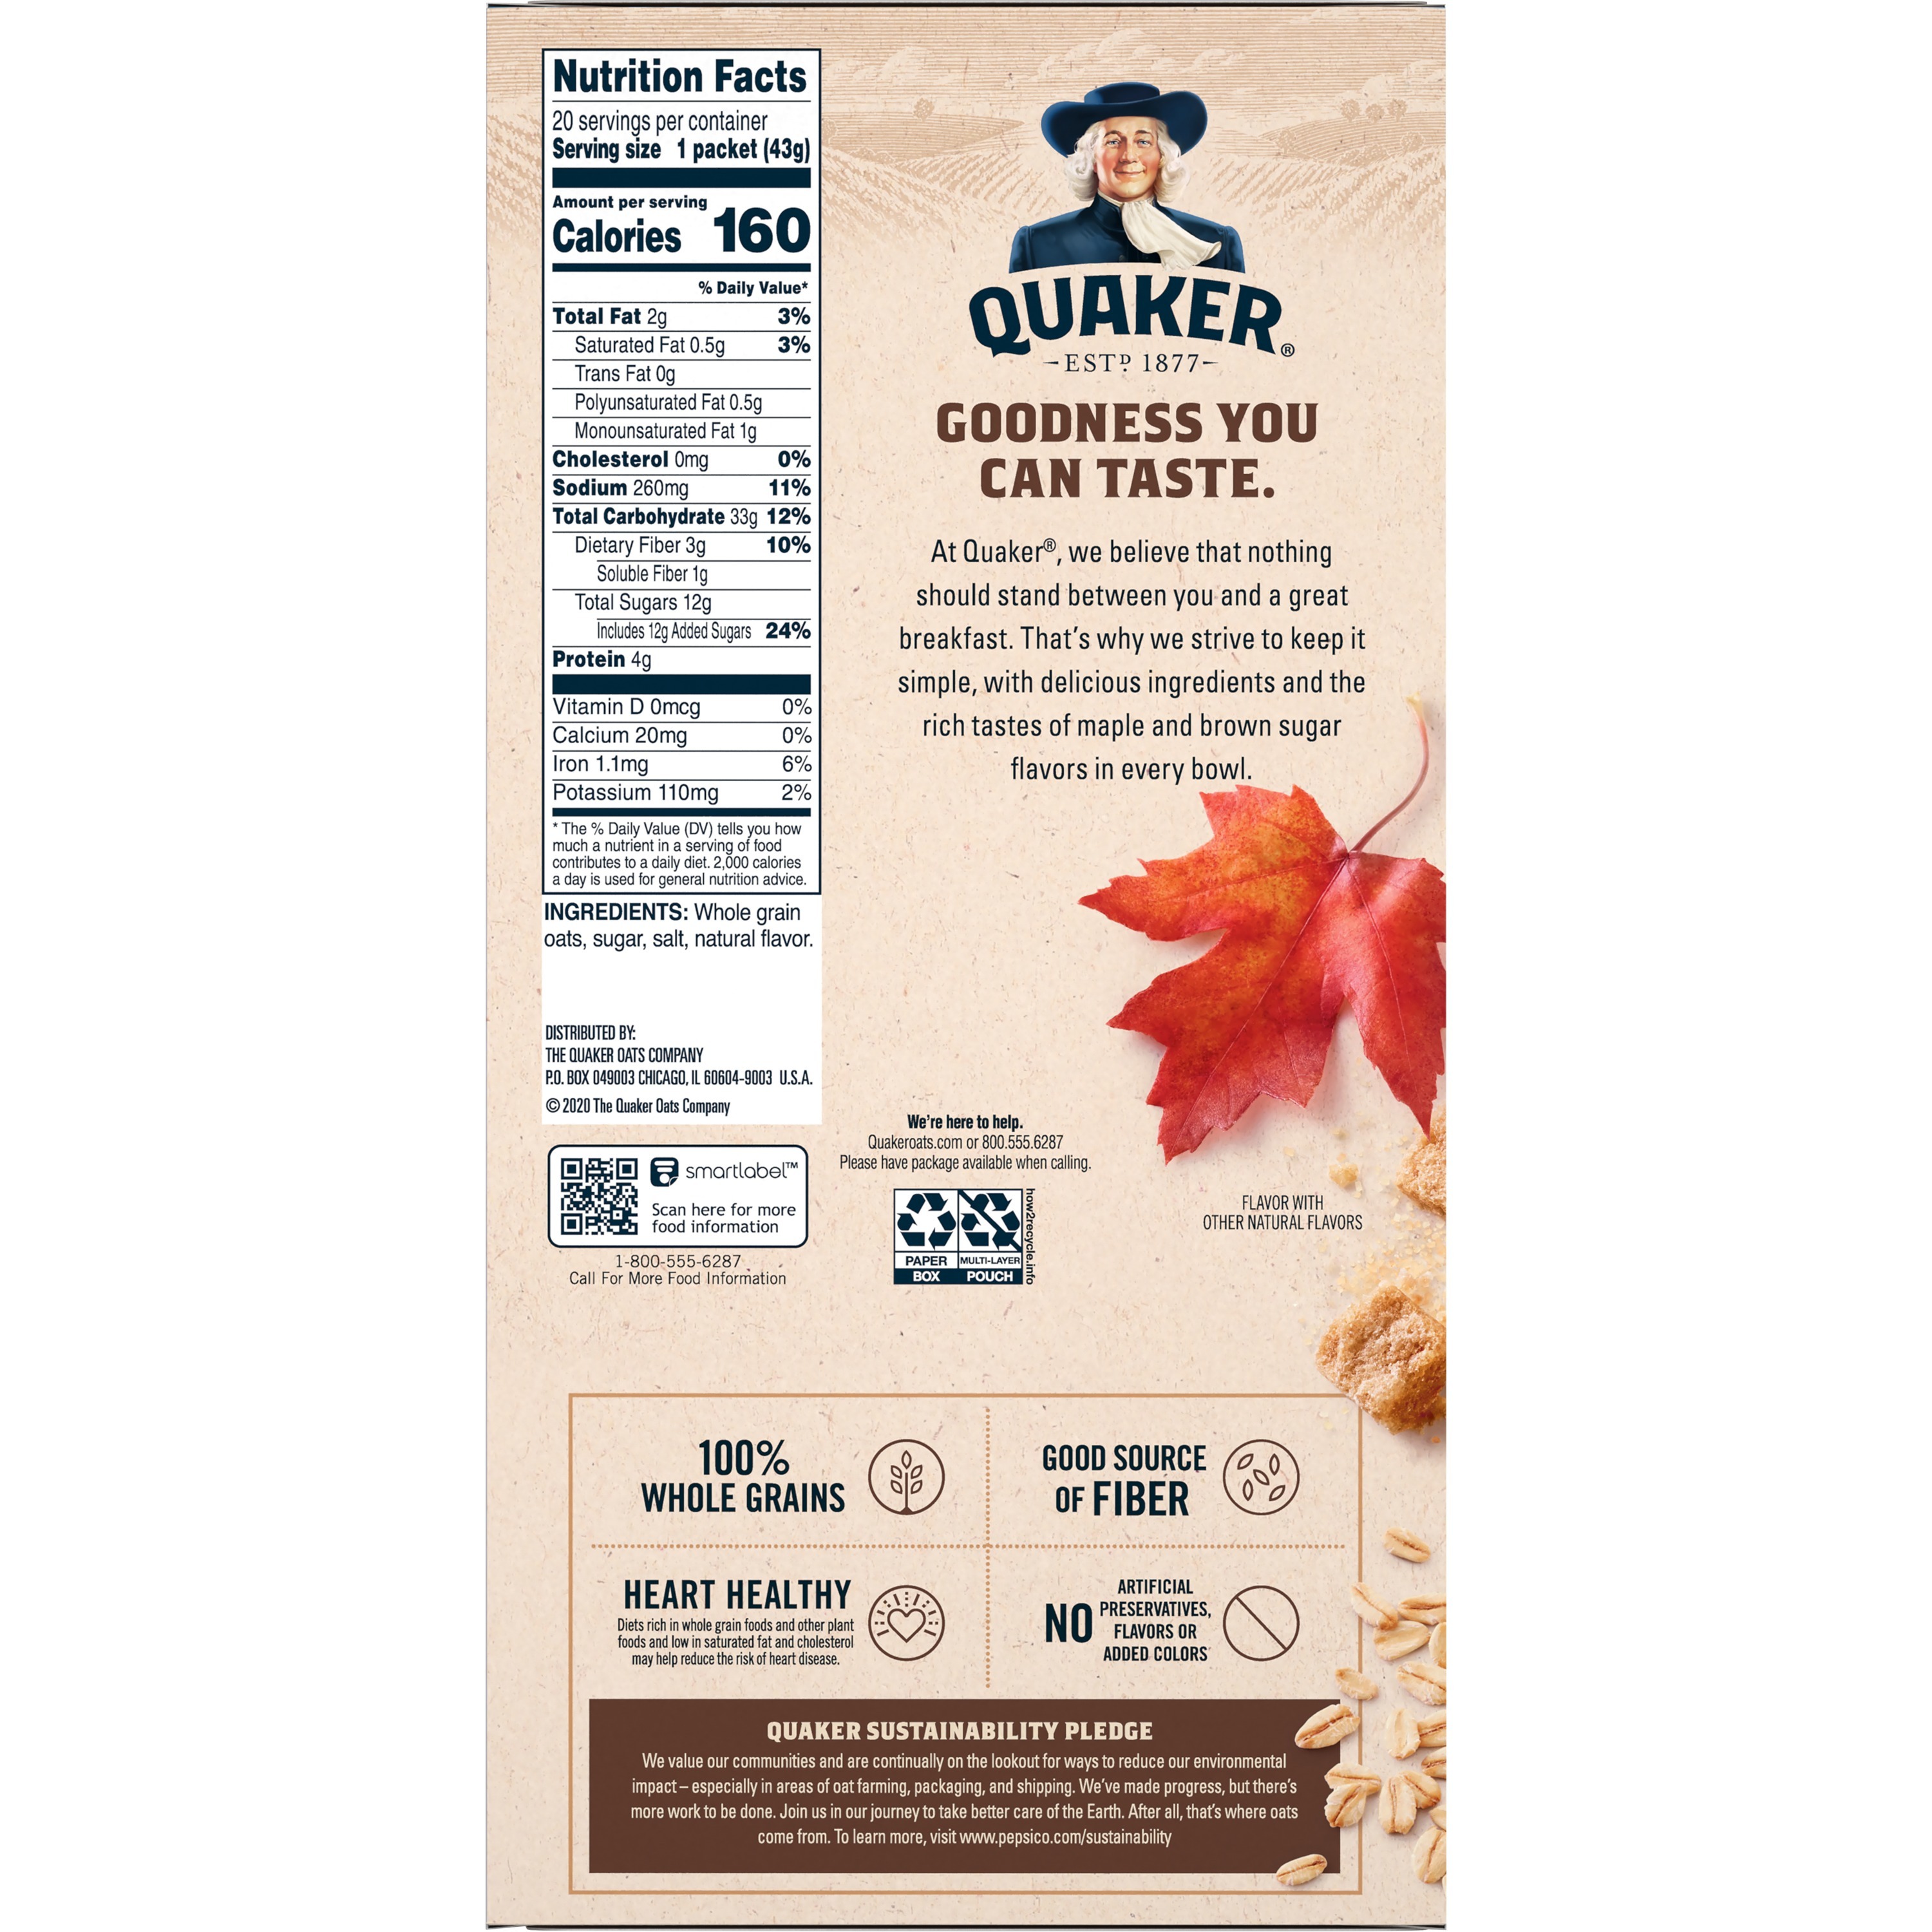 Quaker, Instant Oatmeal, Maple & Brown Sugar, Quick Cook Oatmeal, 1.51 oz, 20 Packets - image 4 of 8